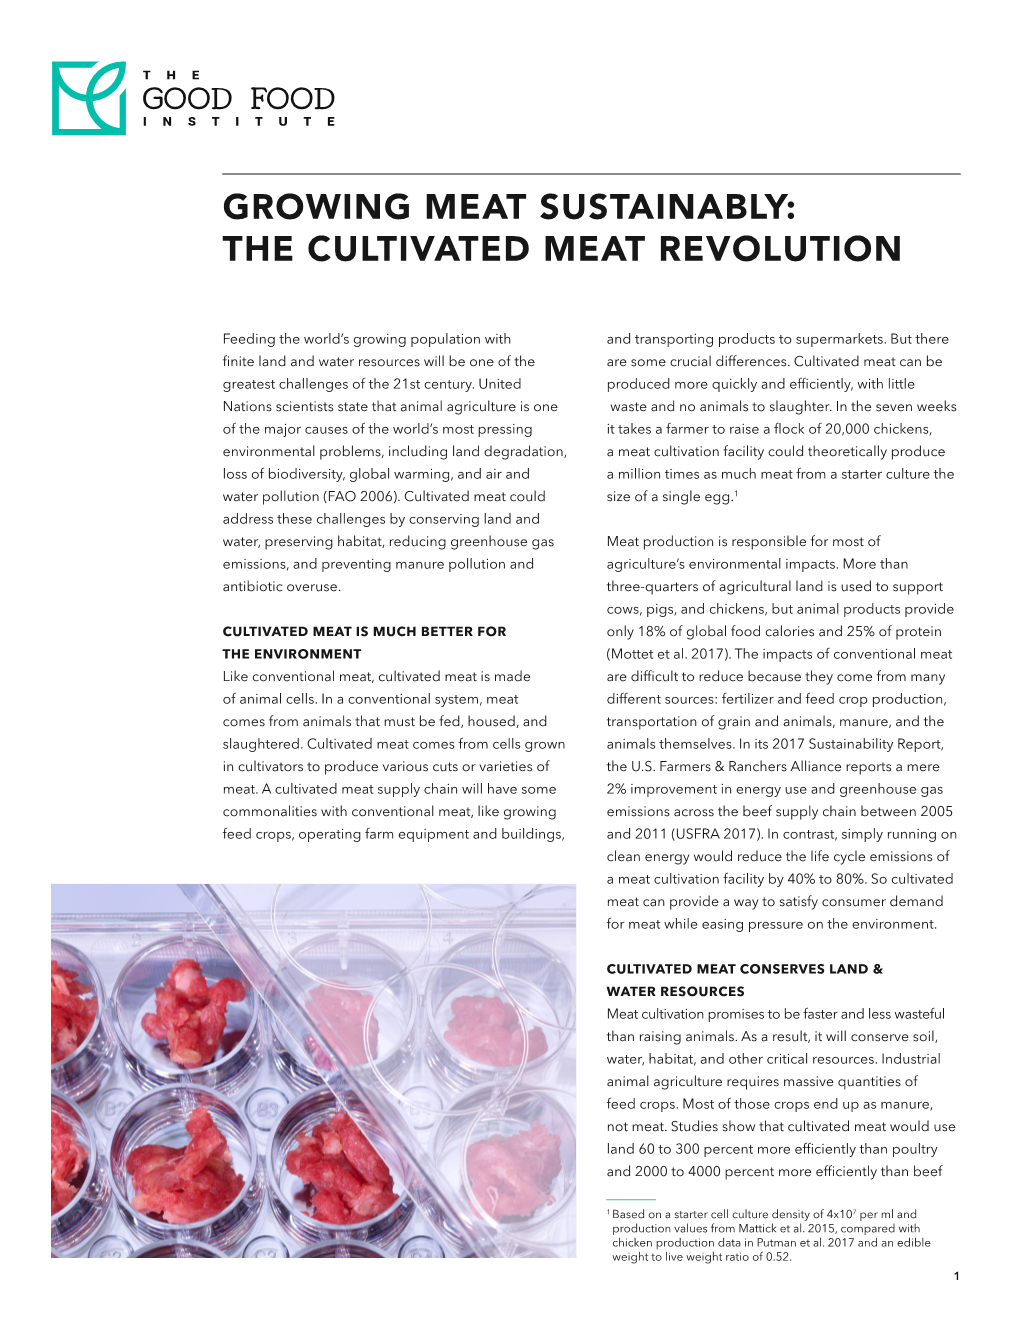 Growing Meat Sustainably: the Cultivated Meat Revolution